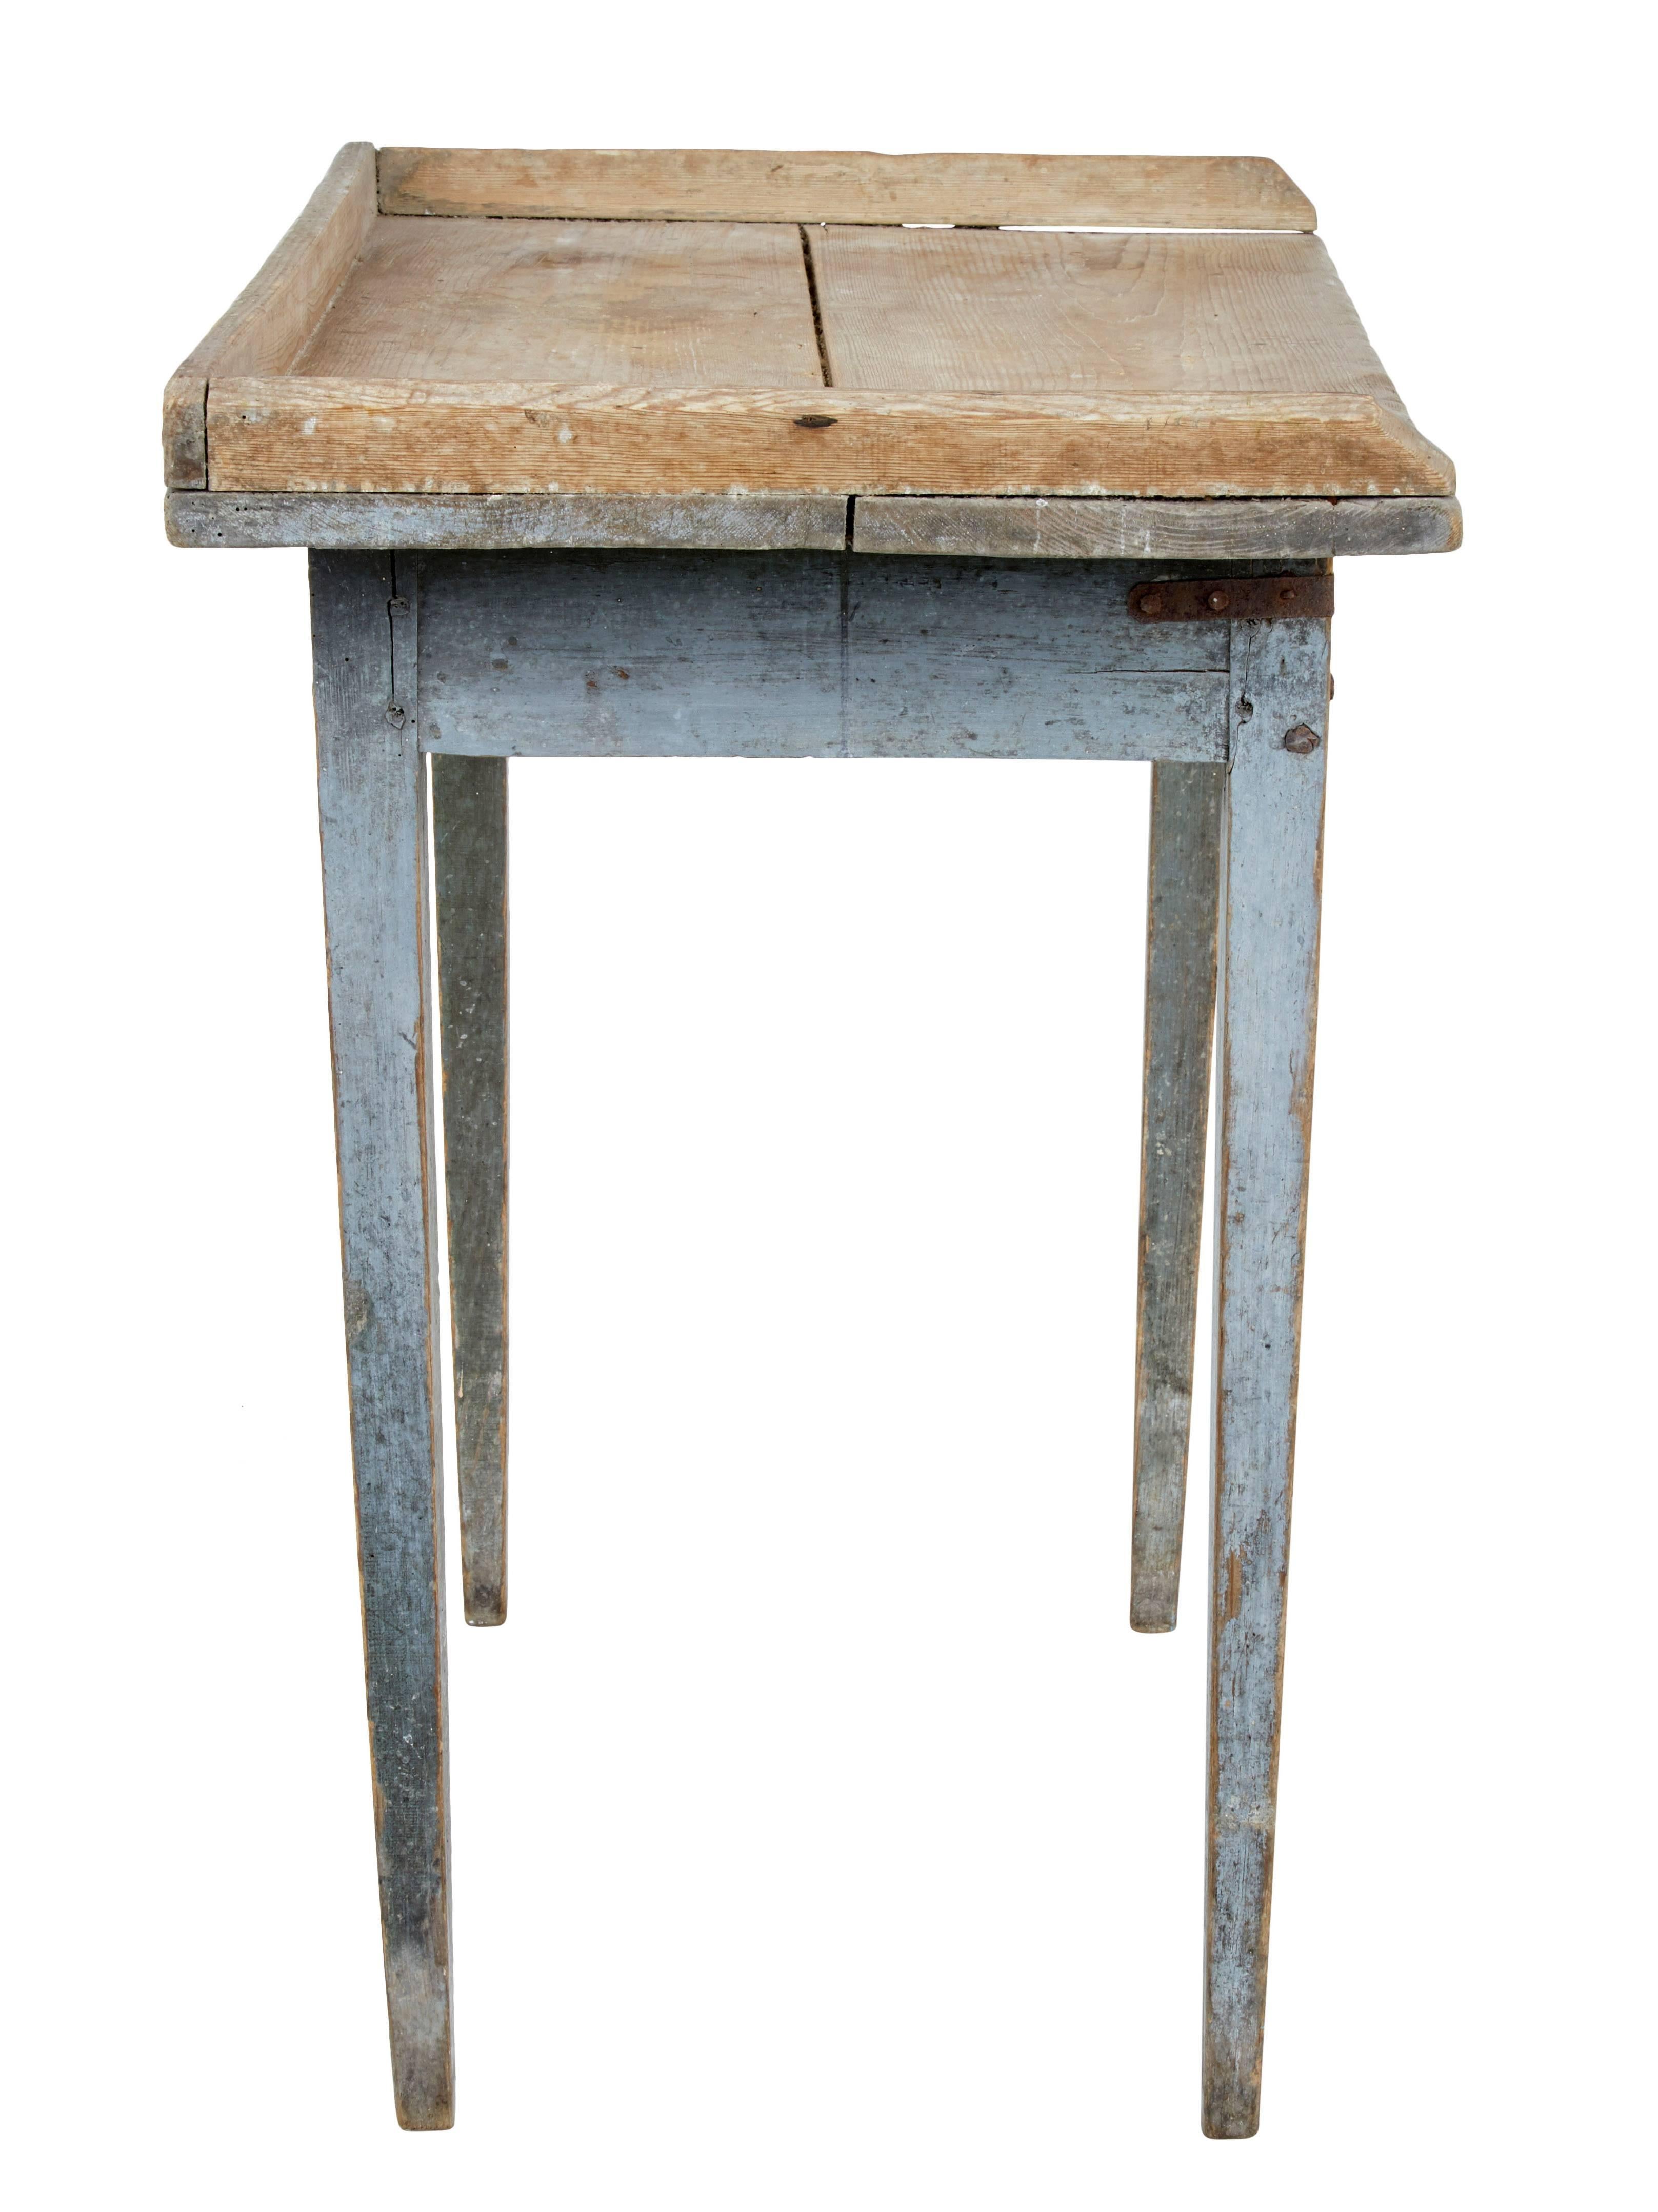 Rustic 19th Century Swedish Scrubbed Pine Occasional Table